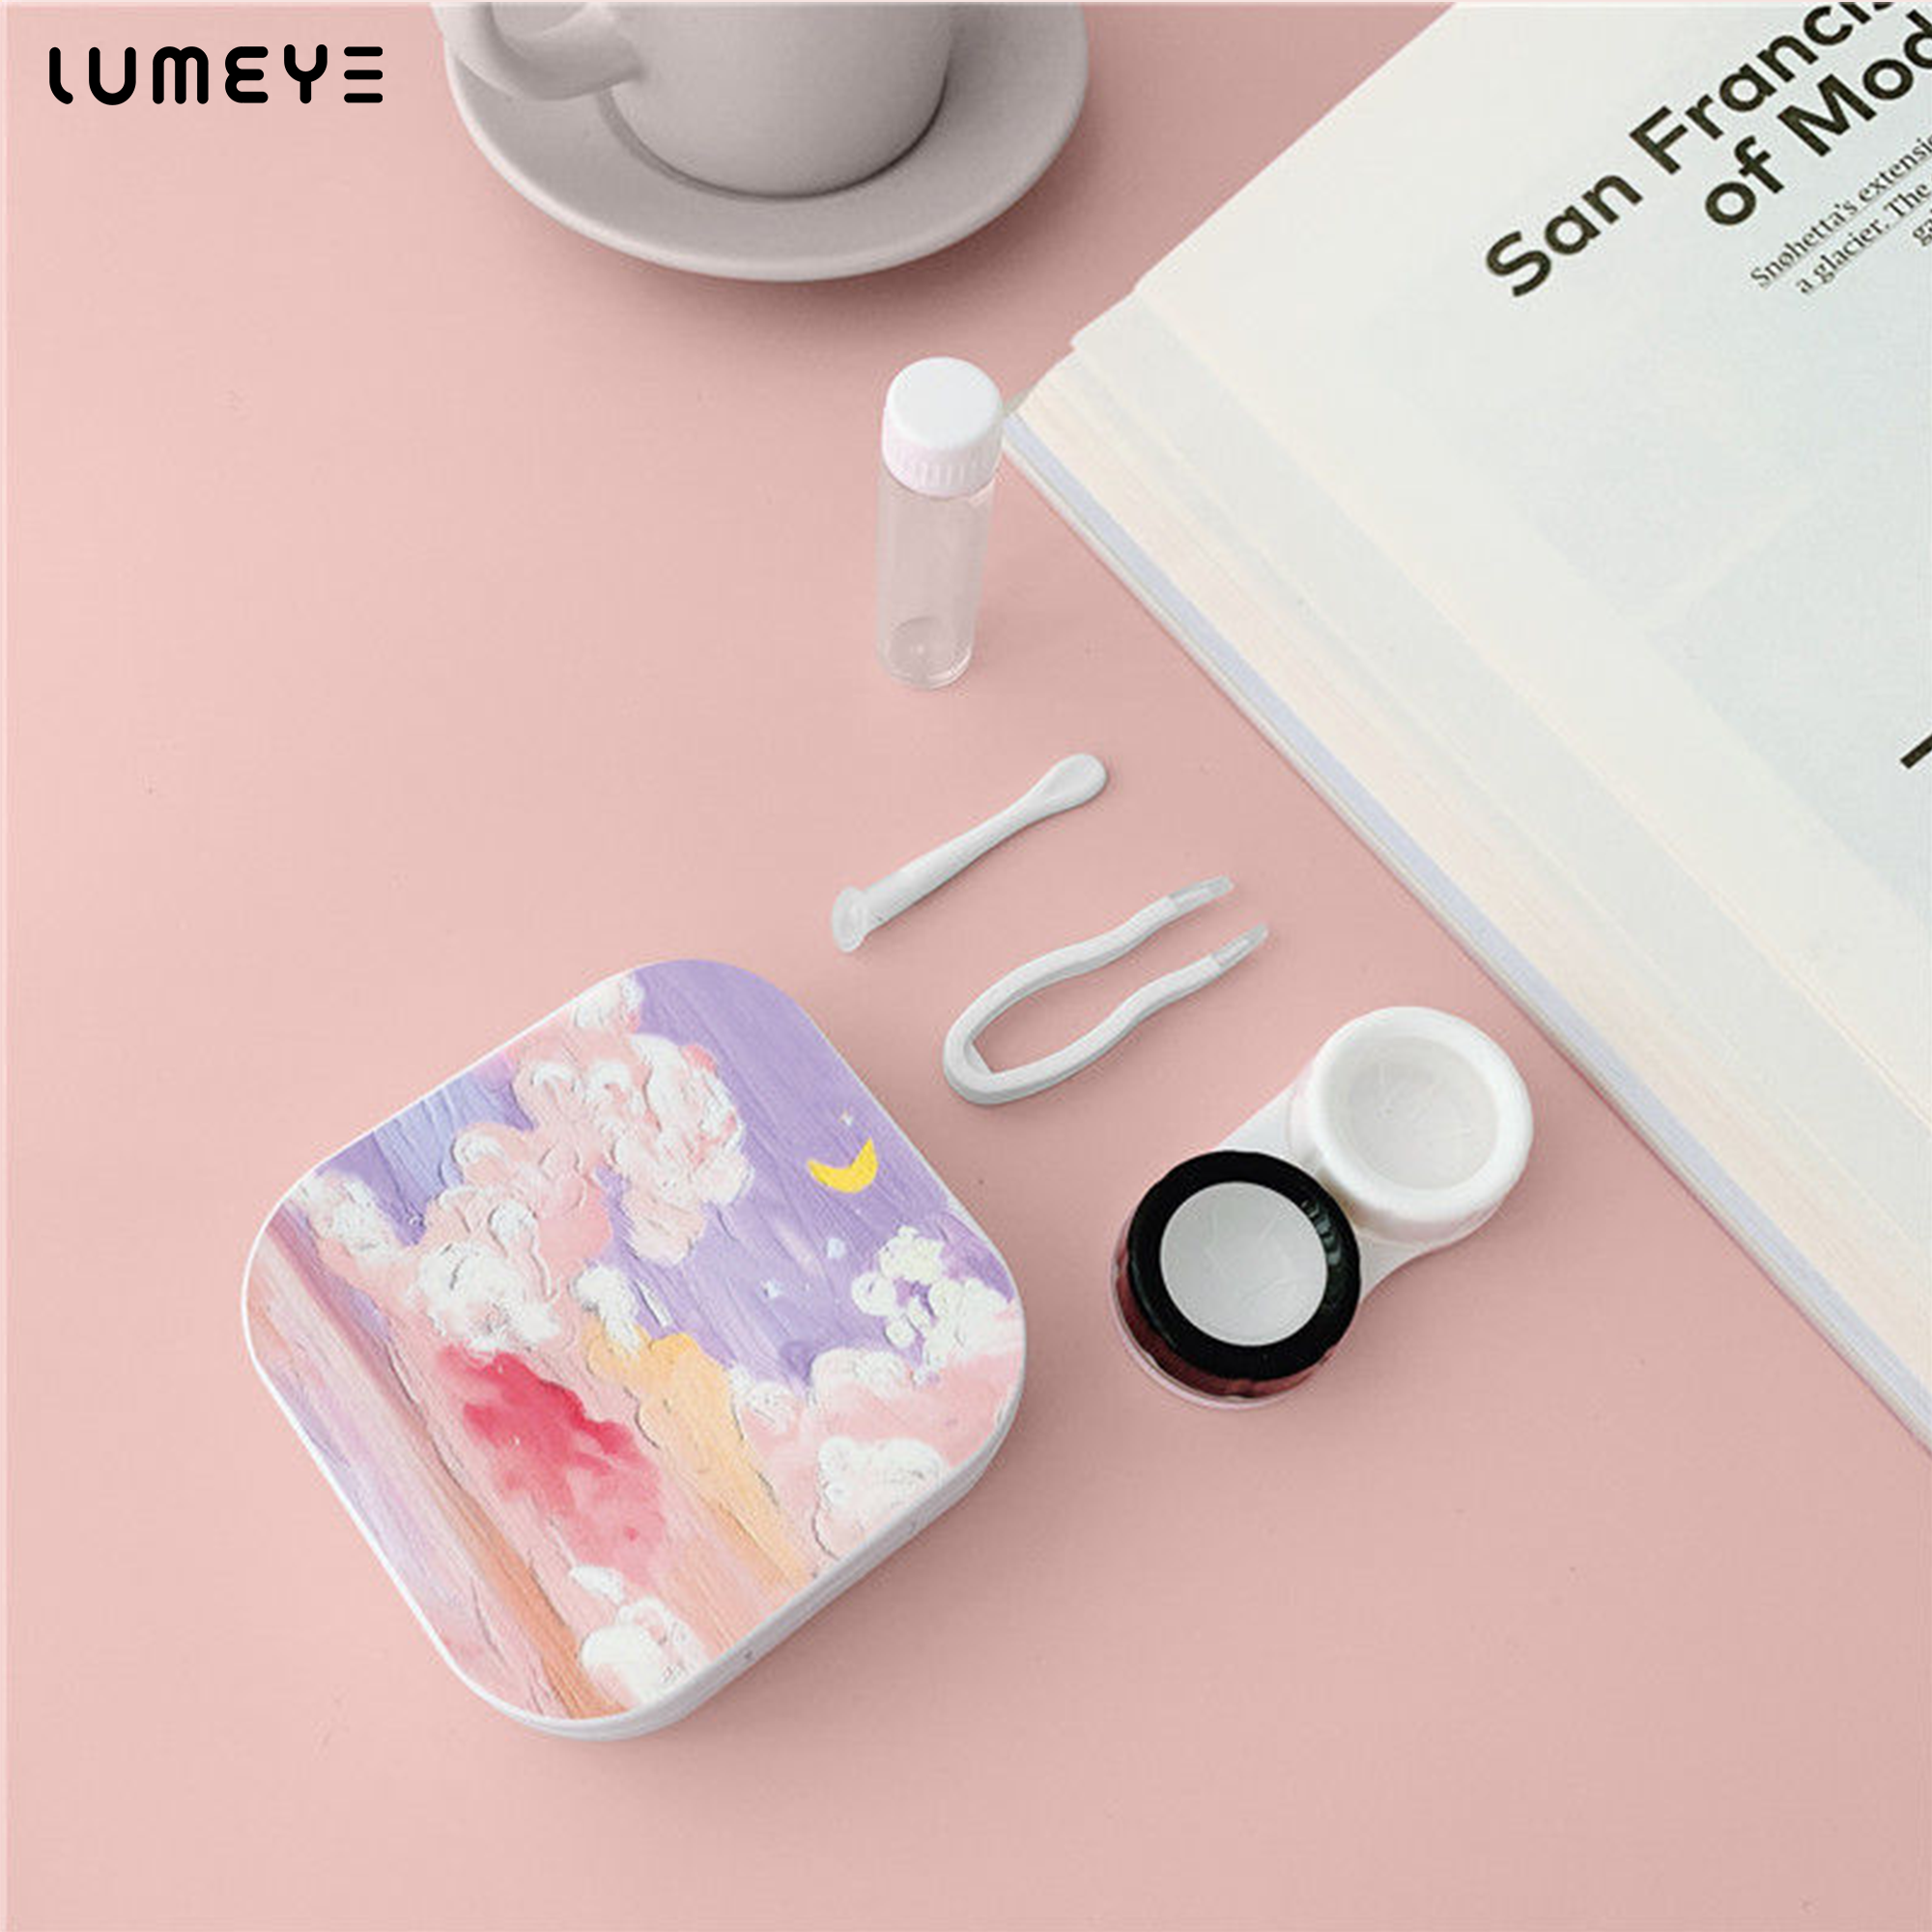 Best COLORED CONTACTS - LUMEYE Pinky Strawberry Moon Lens Case - LUMEYE